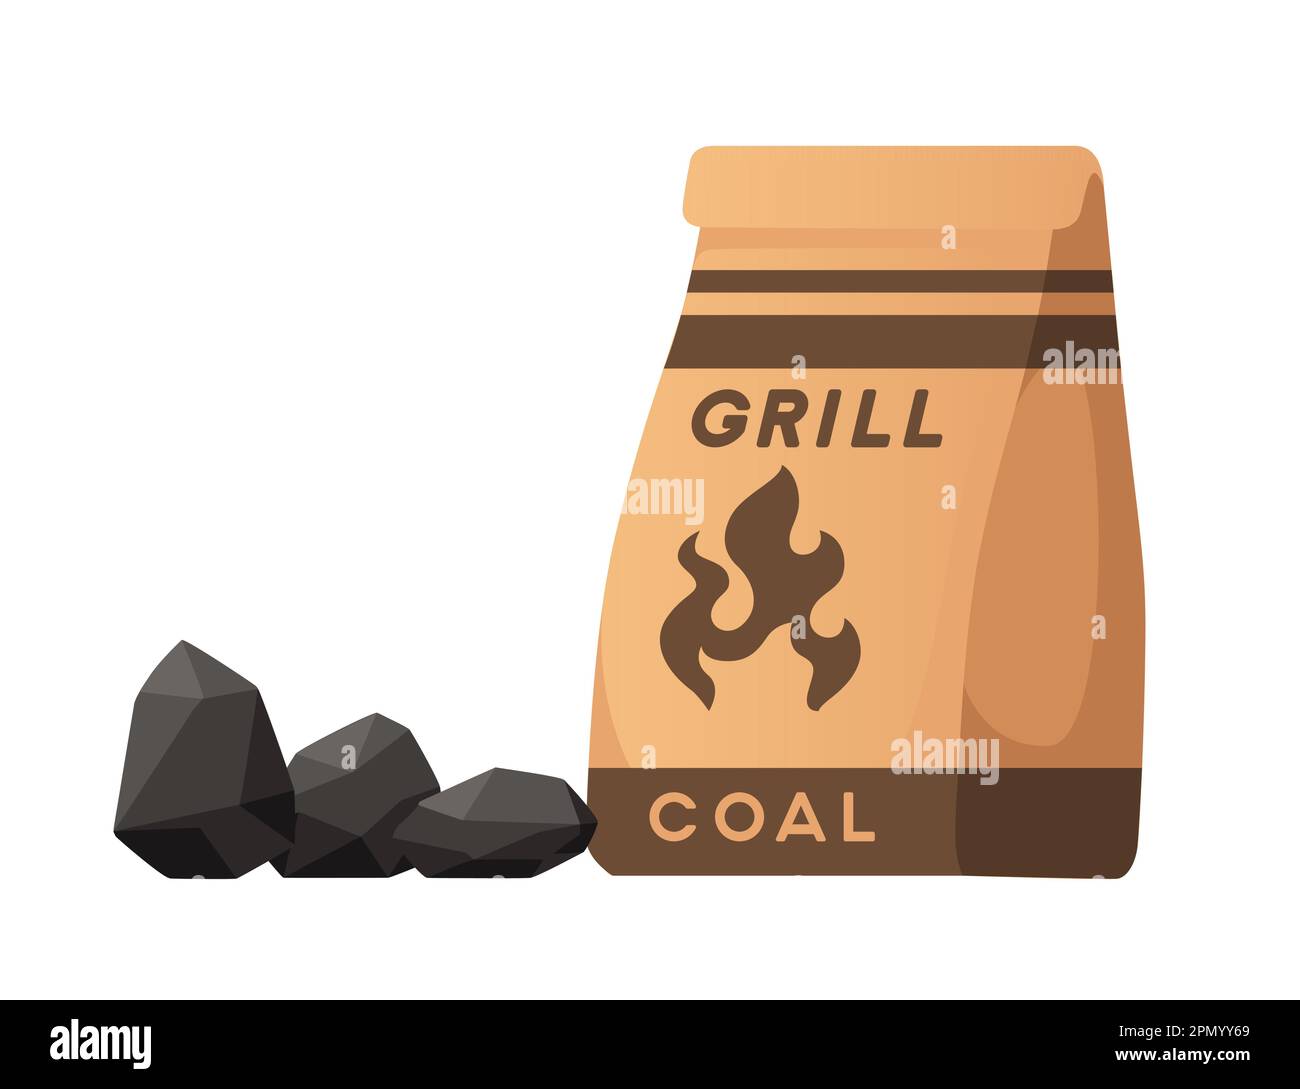 Grill black coal in paper bag retail product vector illustration isolated on white background Stock Vector